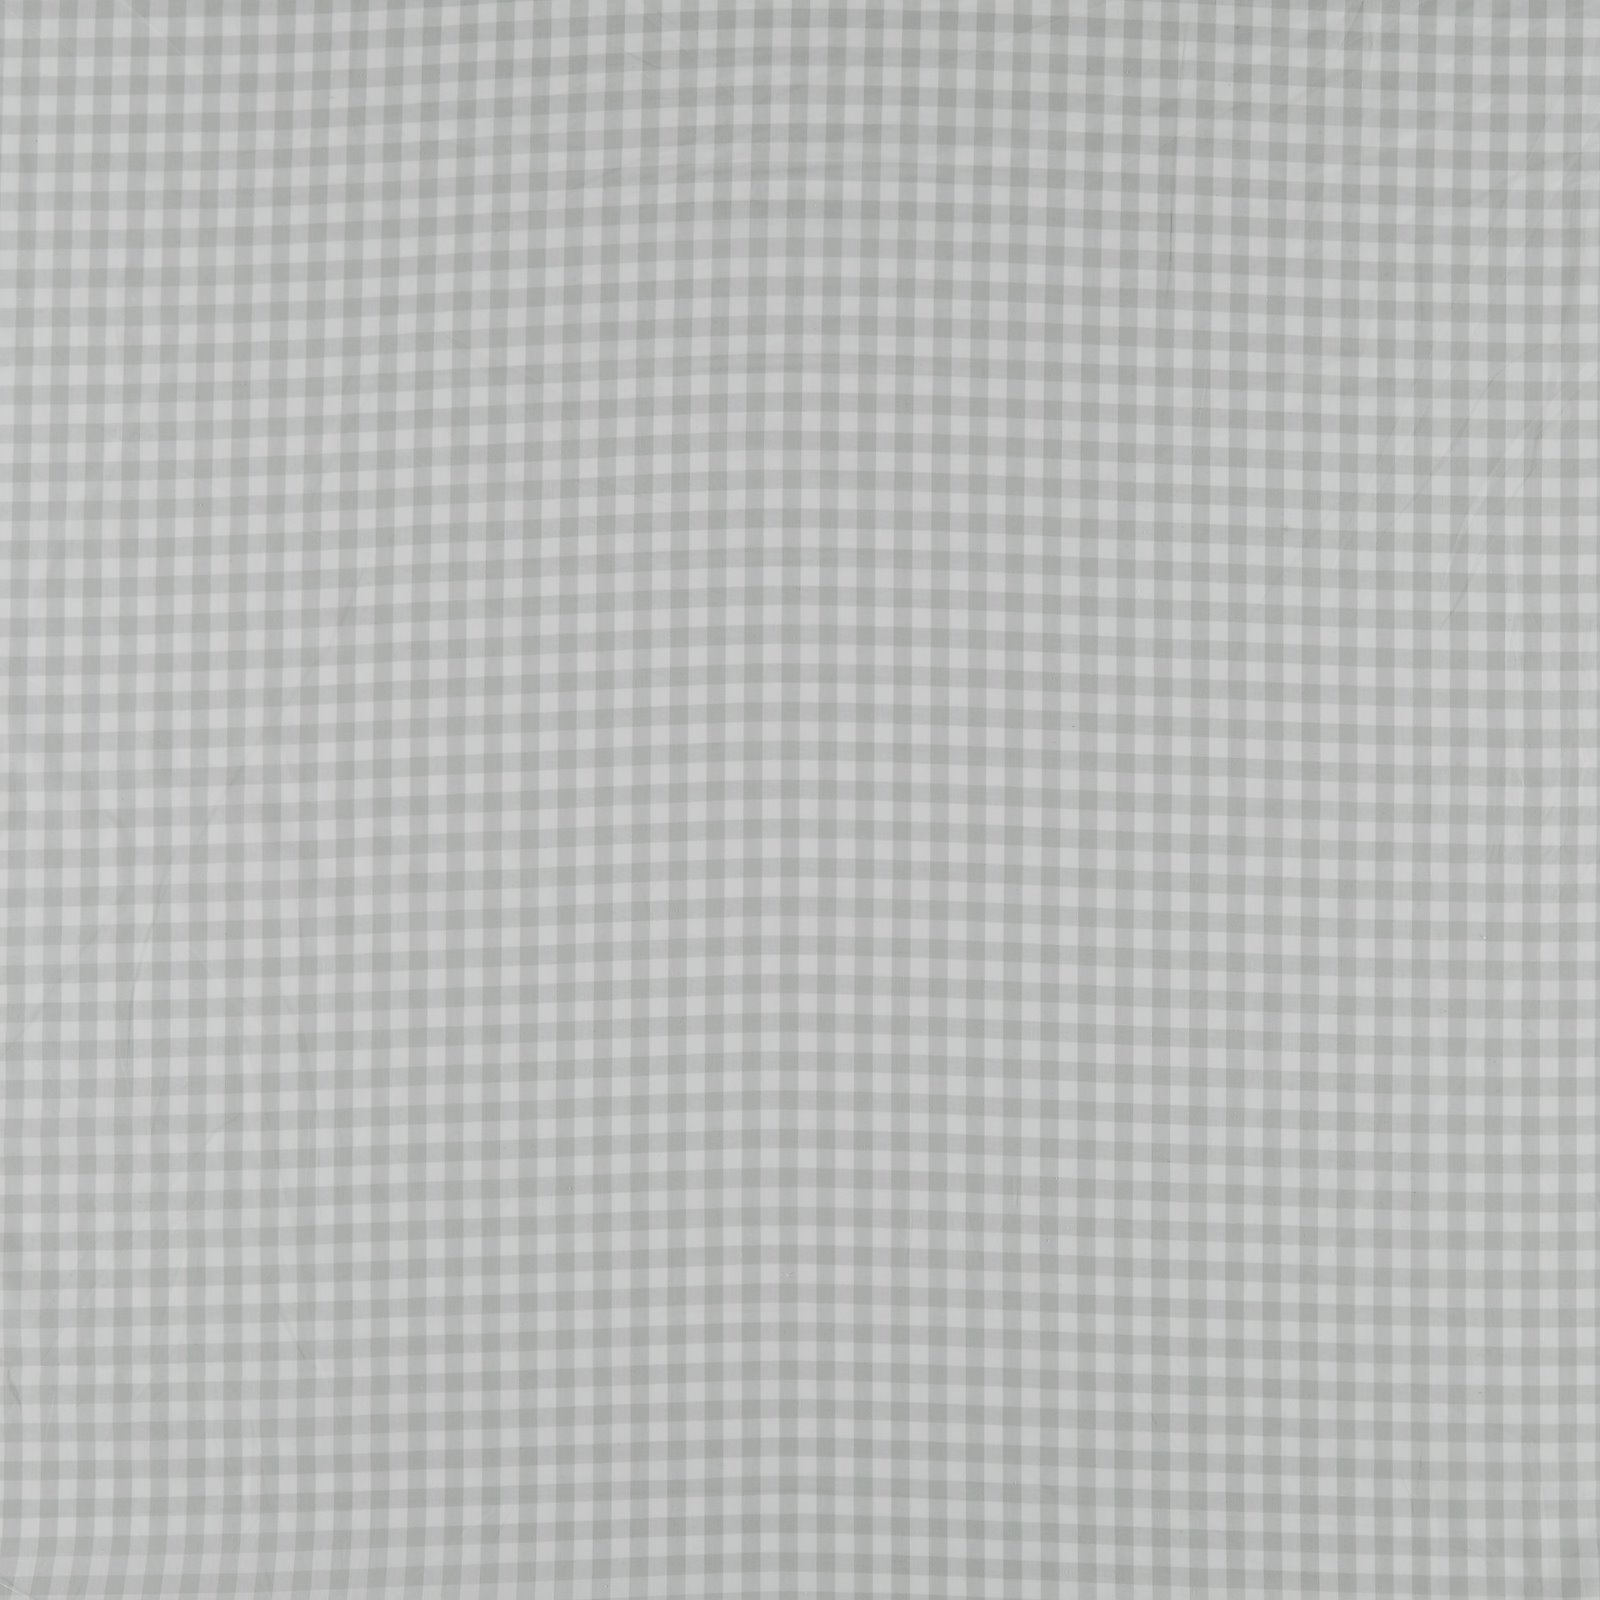 Cotton yarn dyed light grey/white check 780885_pack_sp